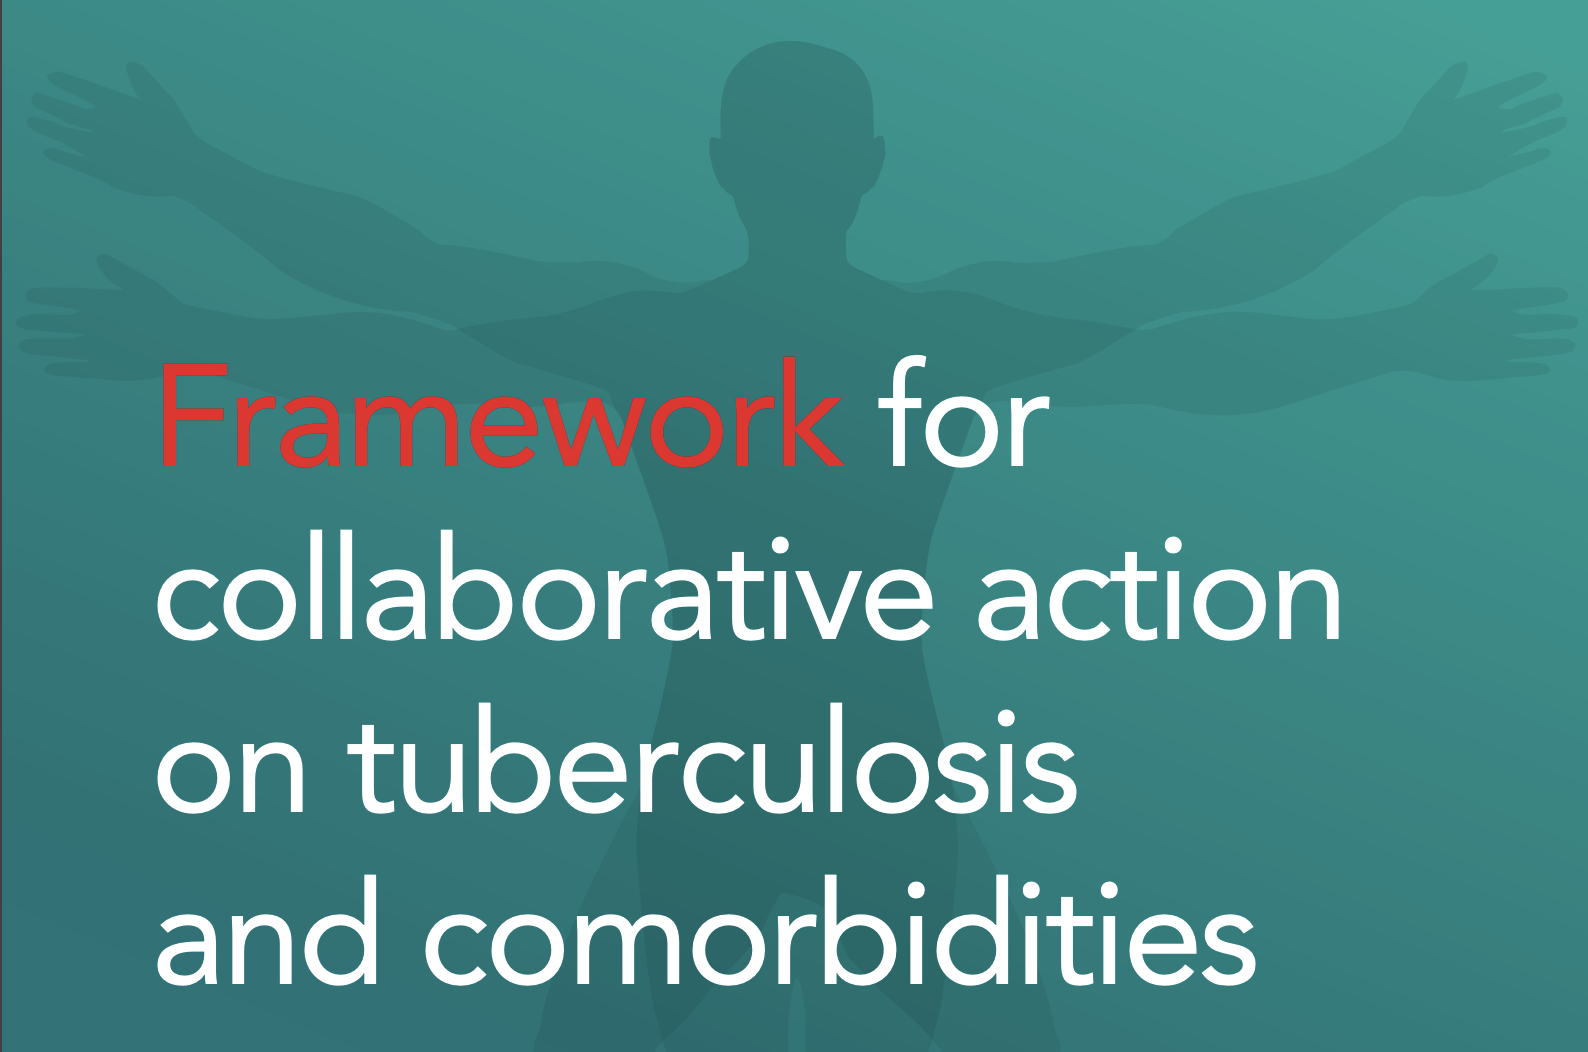 Framework for collaborative action on TB and comorbidities